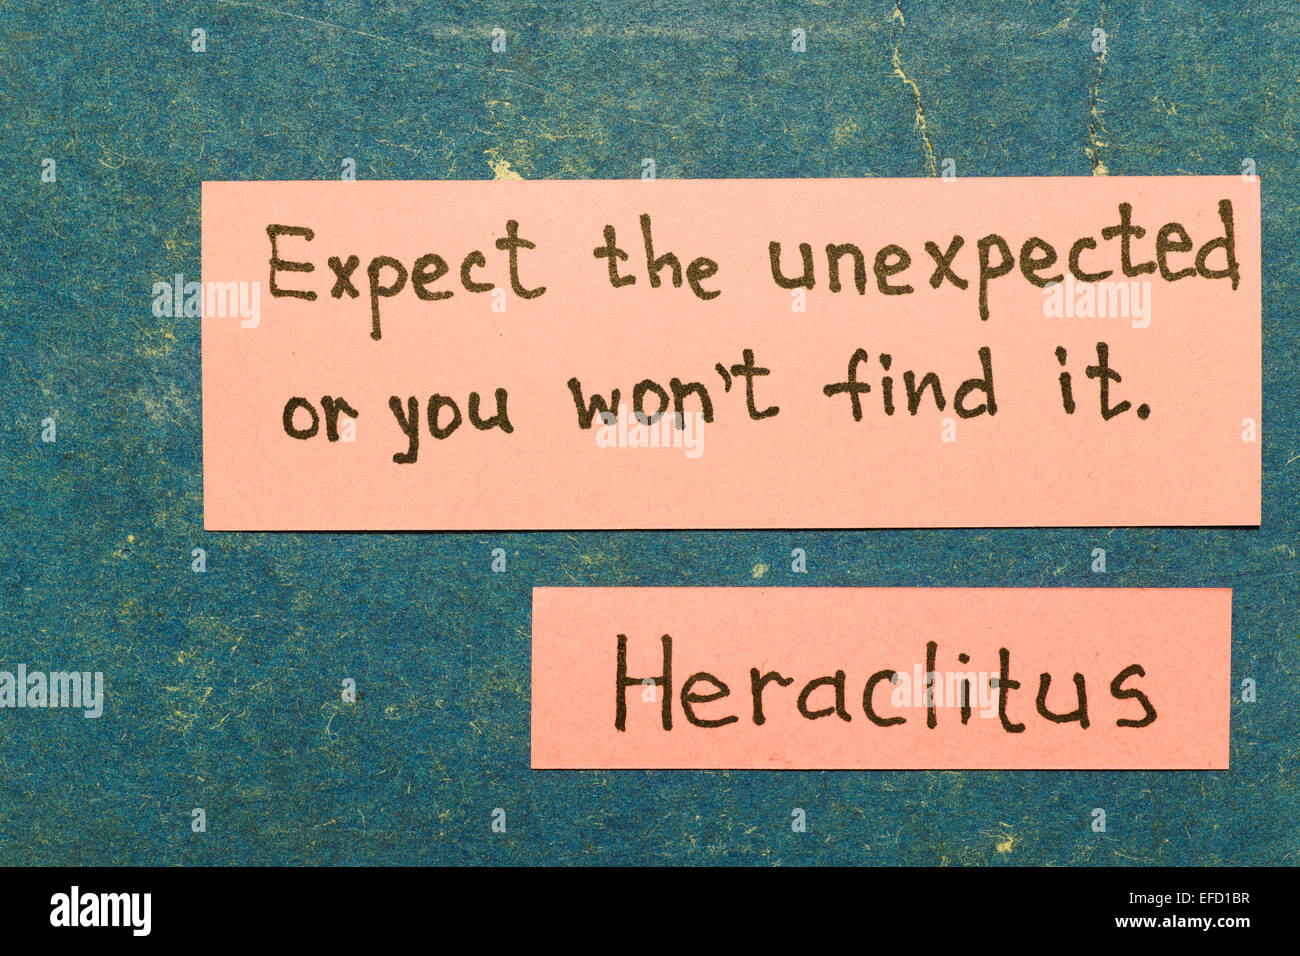 expect the unexpected, or you won't find it - ancient Greek philosopher Heraclitus quote interpretation with pink notes on vinta Stock Photo